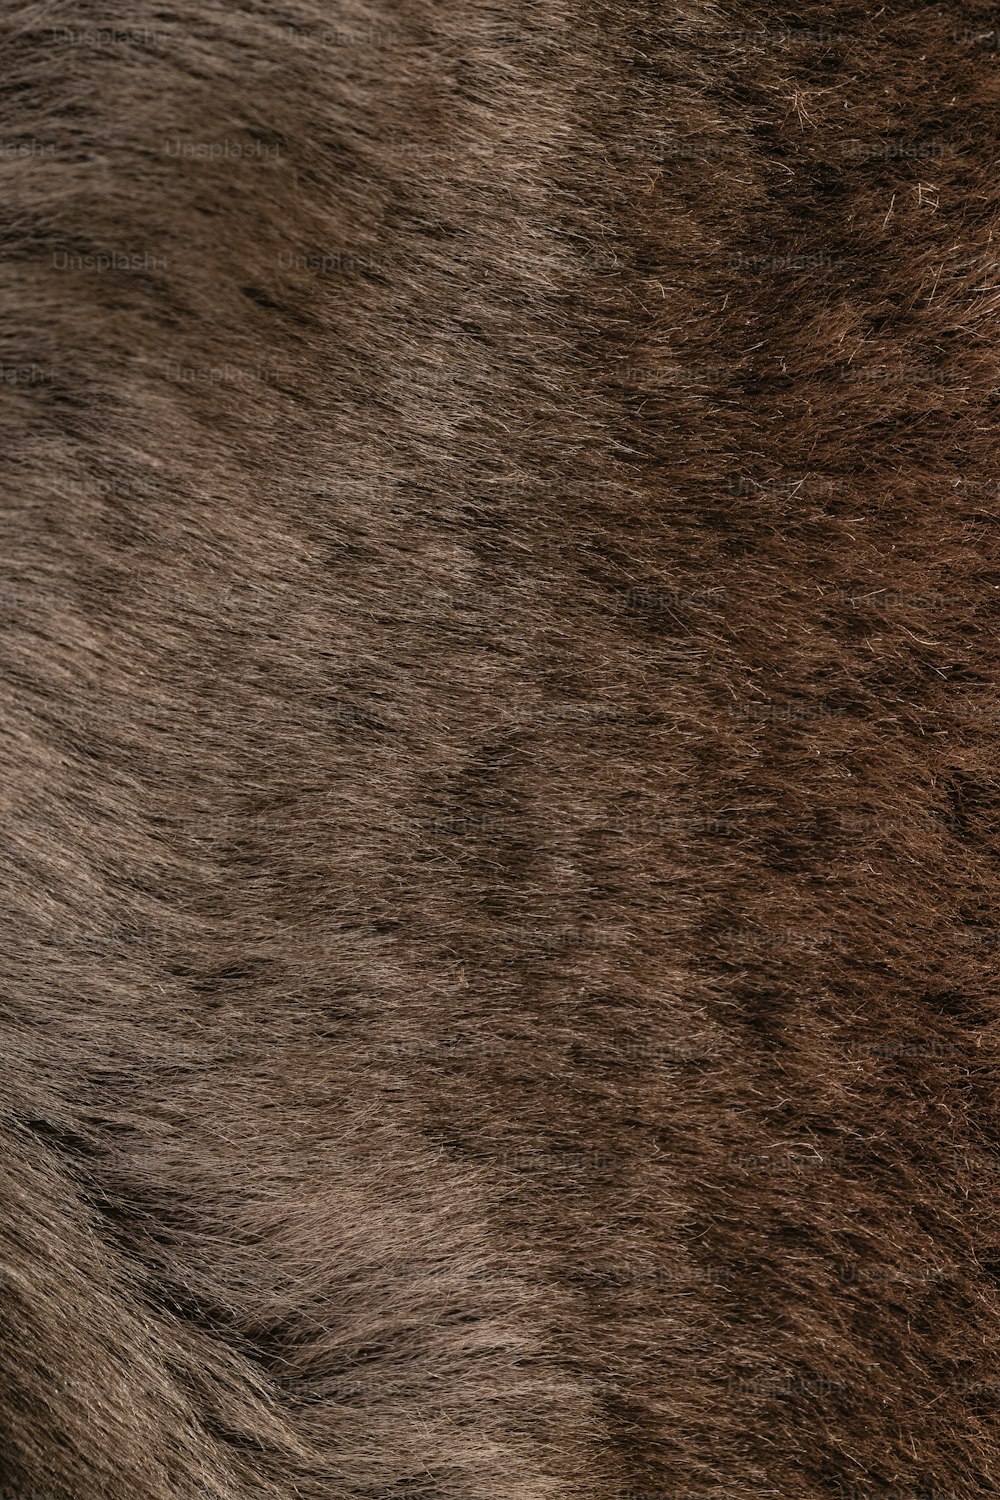 the fur of a horse is brown and black